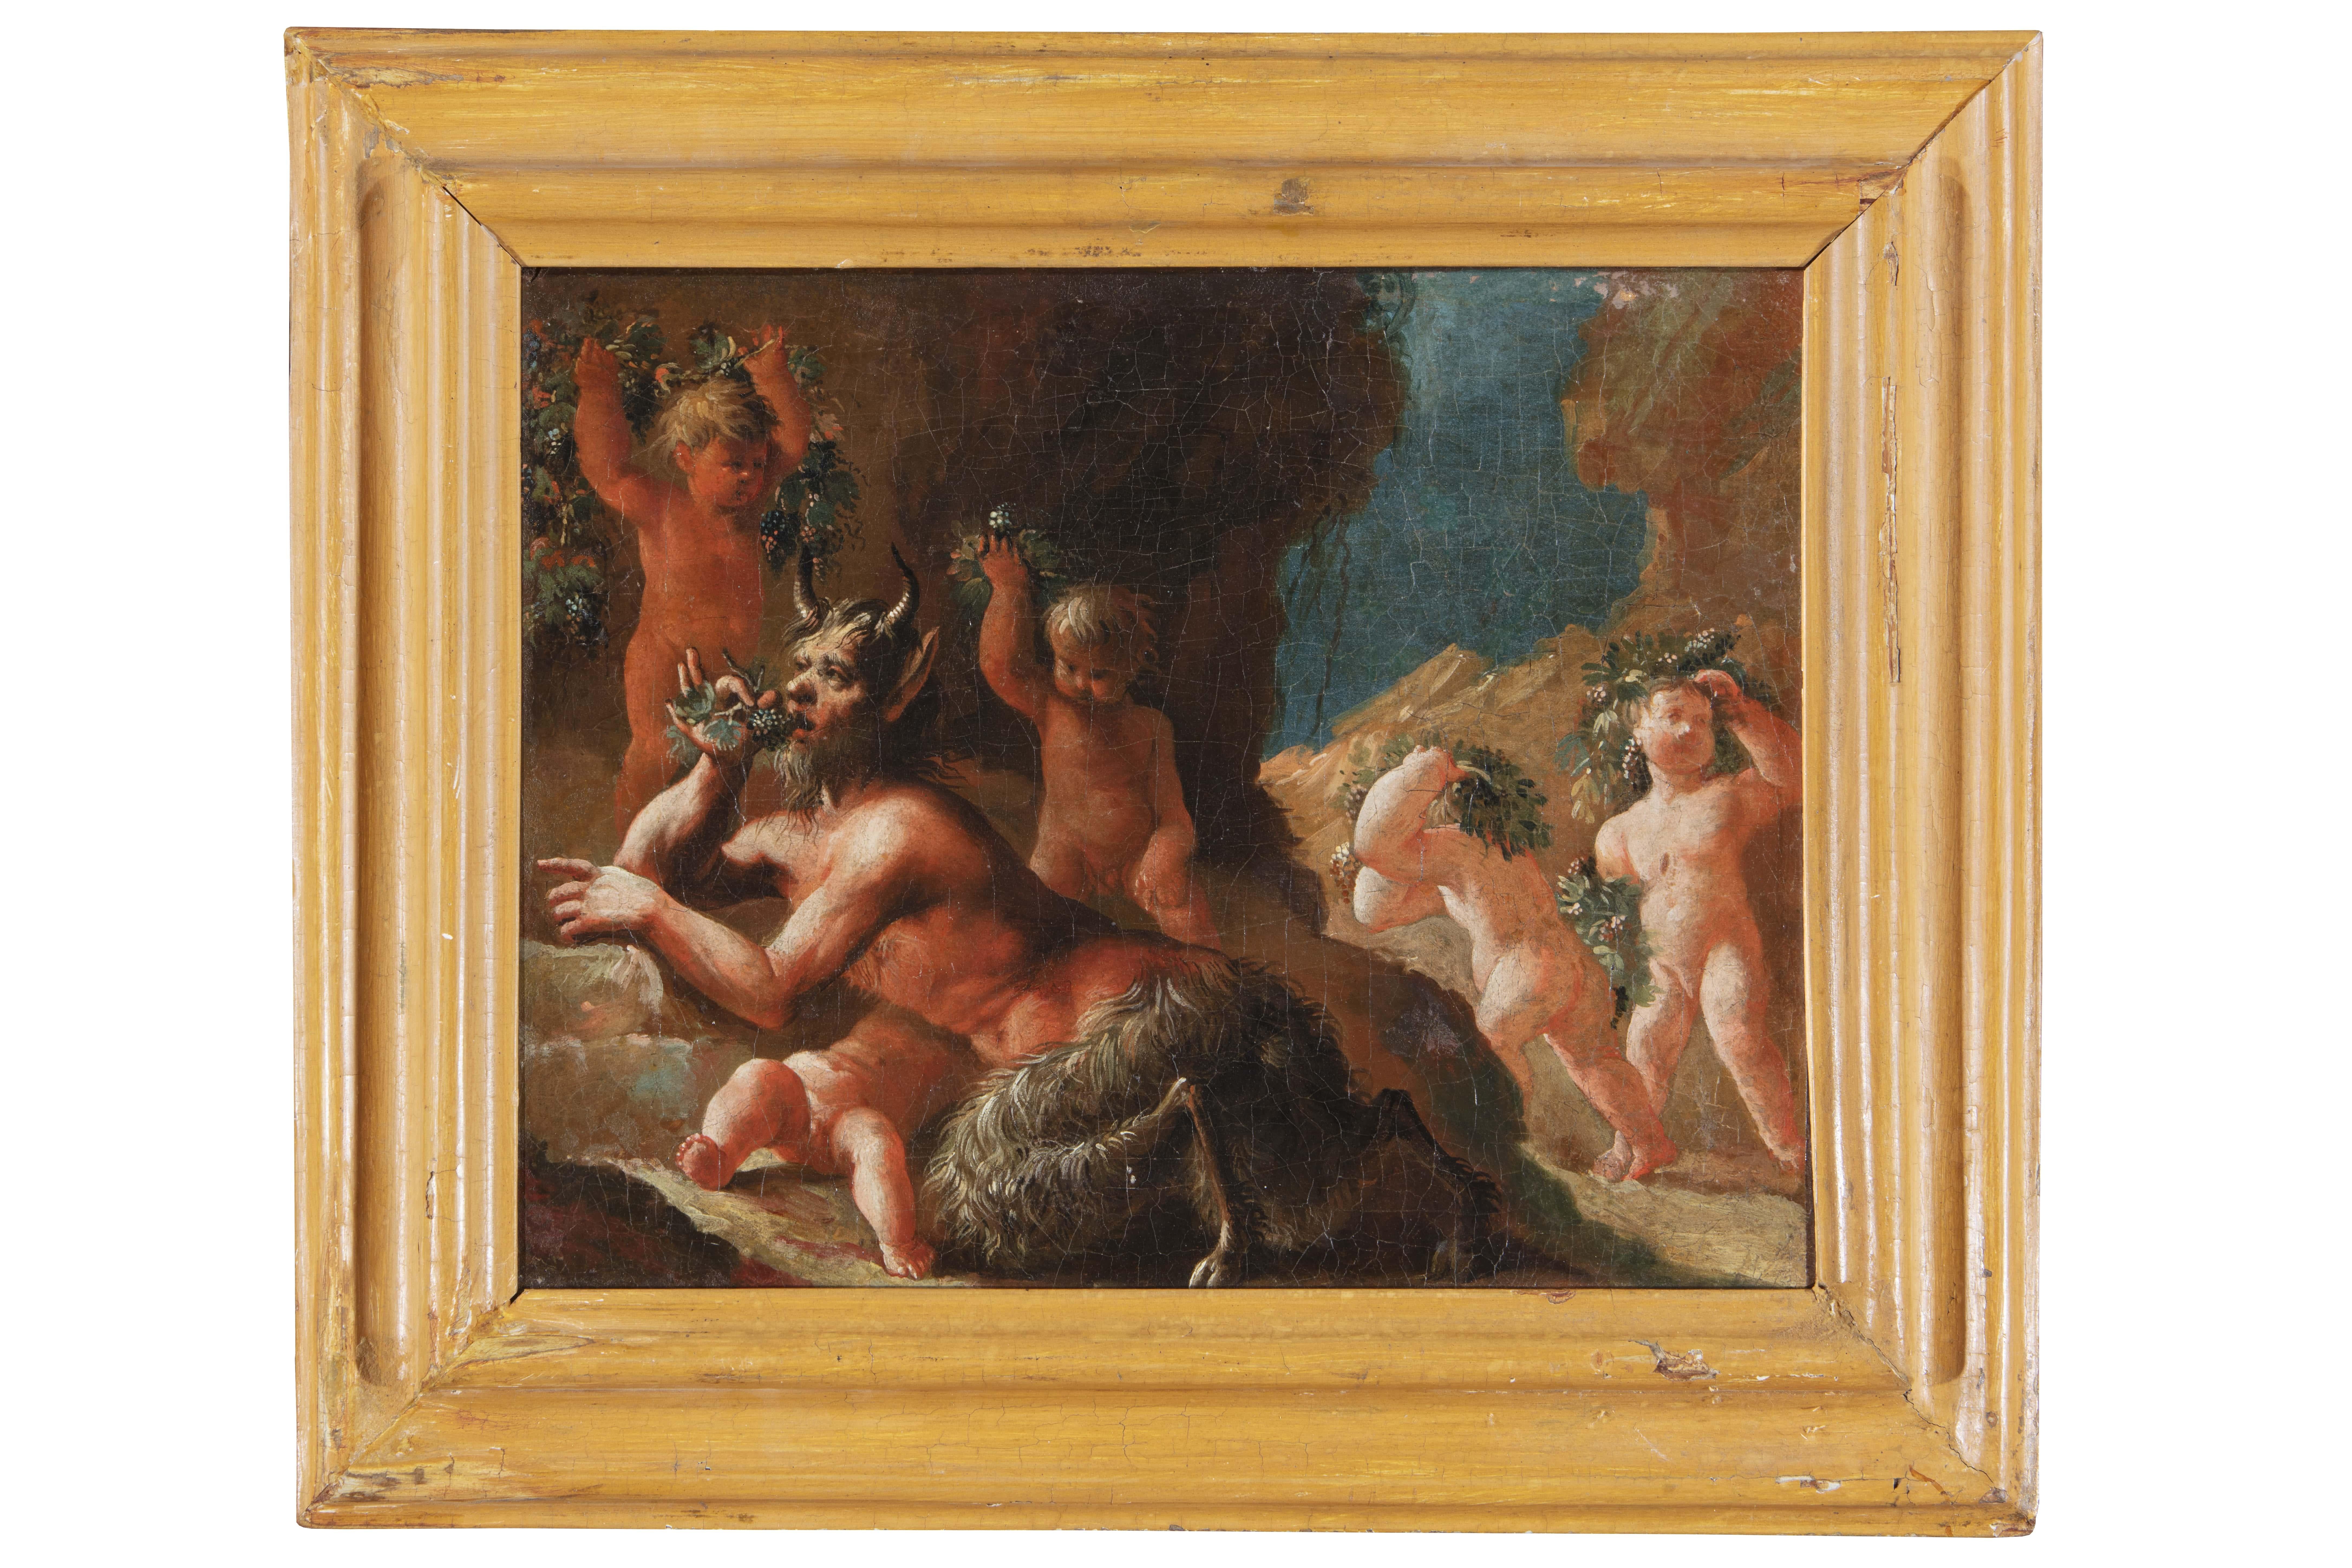 18th-century French maestro Figurative Painting - 18th century By French maestro Bacchanal Oil on canvas